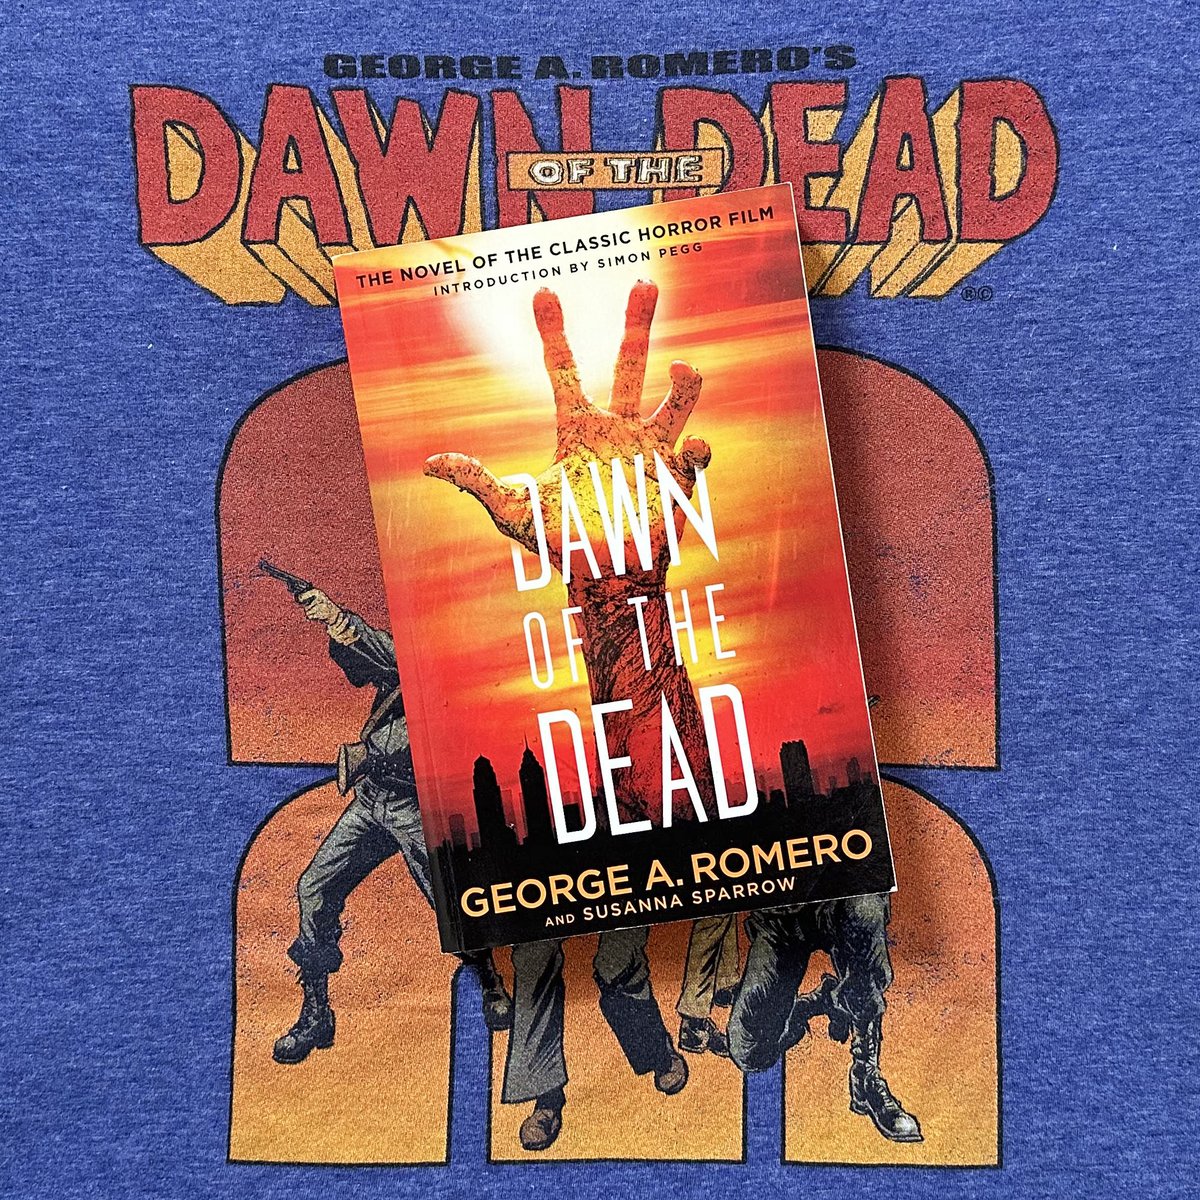 Dawn of the Dead had its US premiere 45 years ago today! I recently found this reprint of the novelization for 4 bucks at @OlliesOutlet.